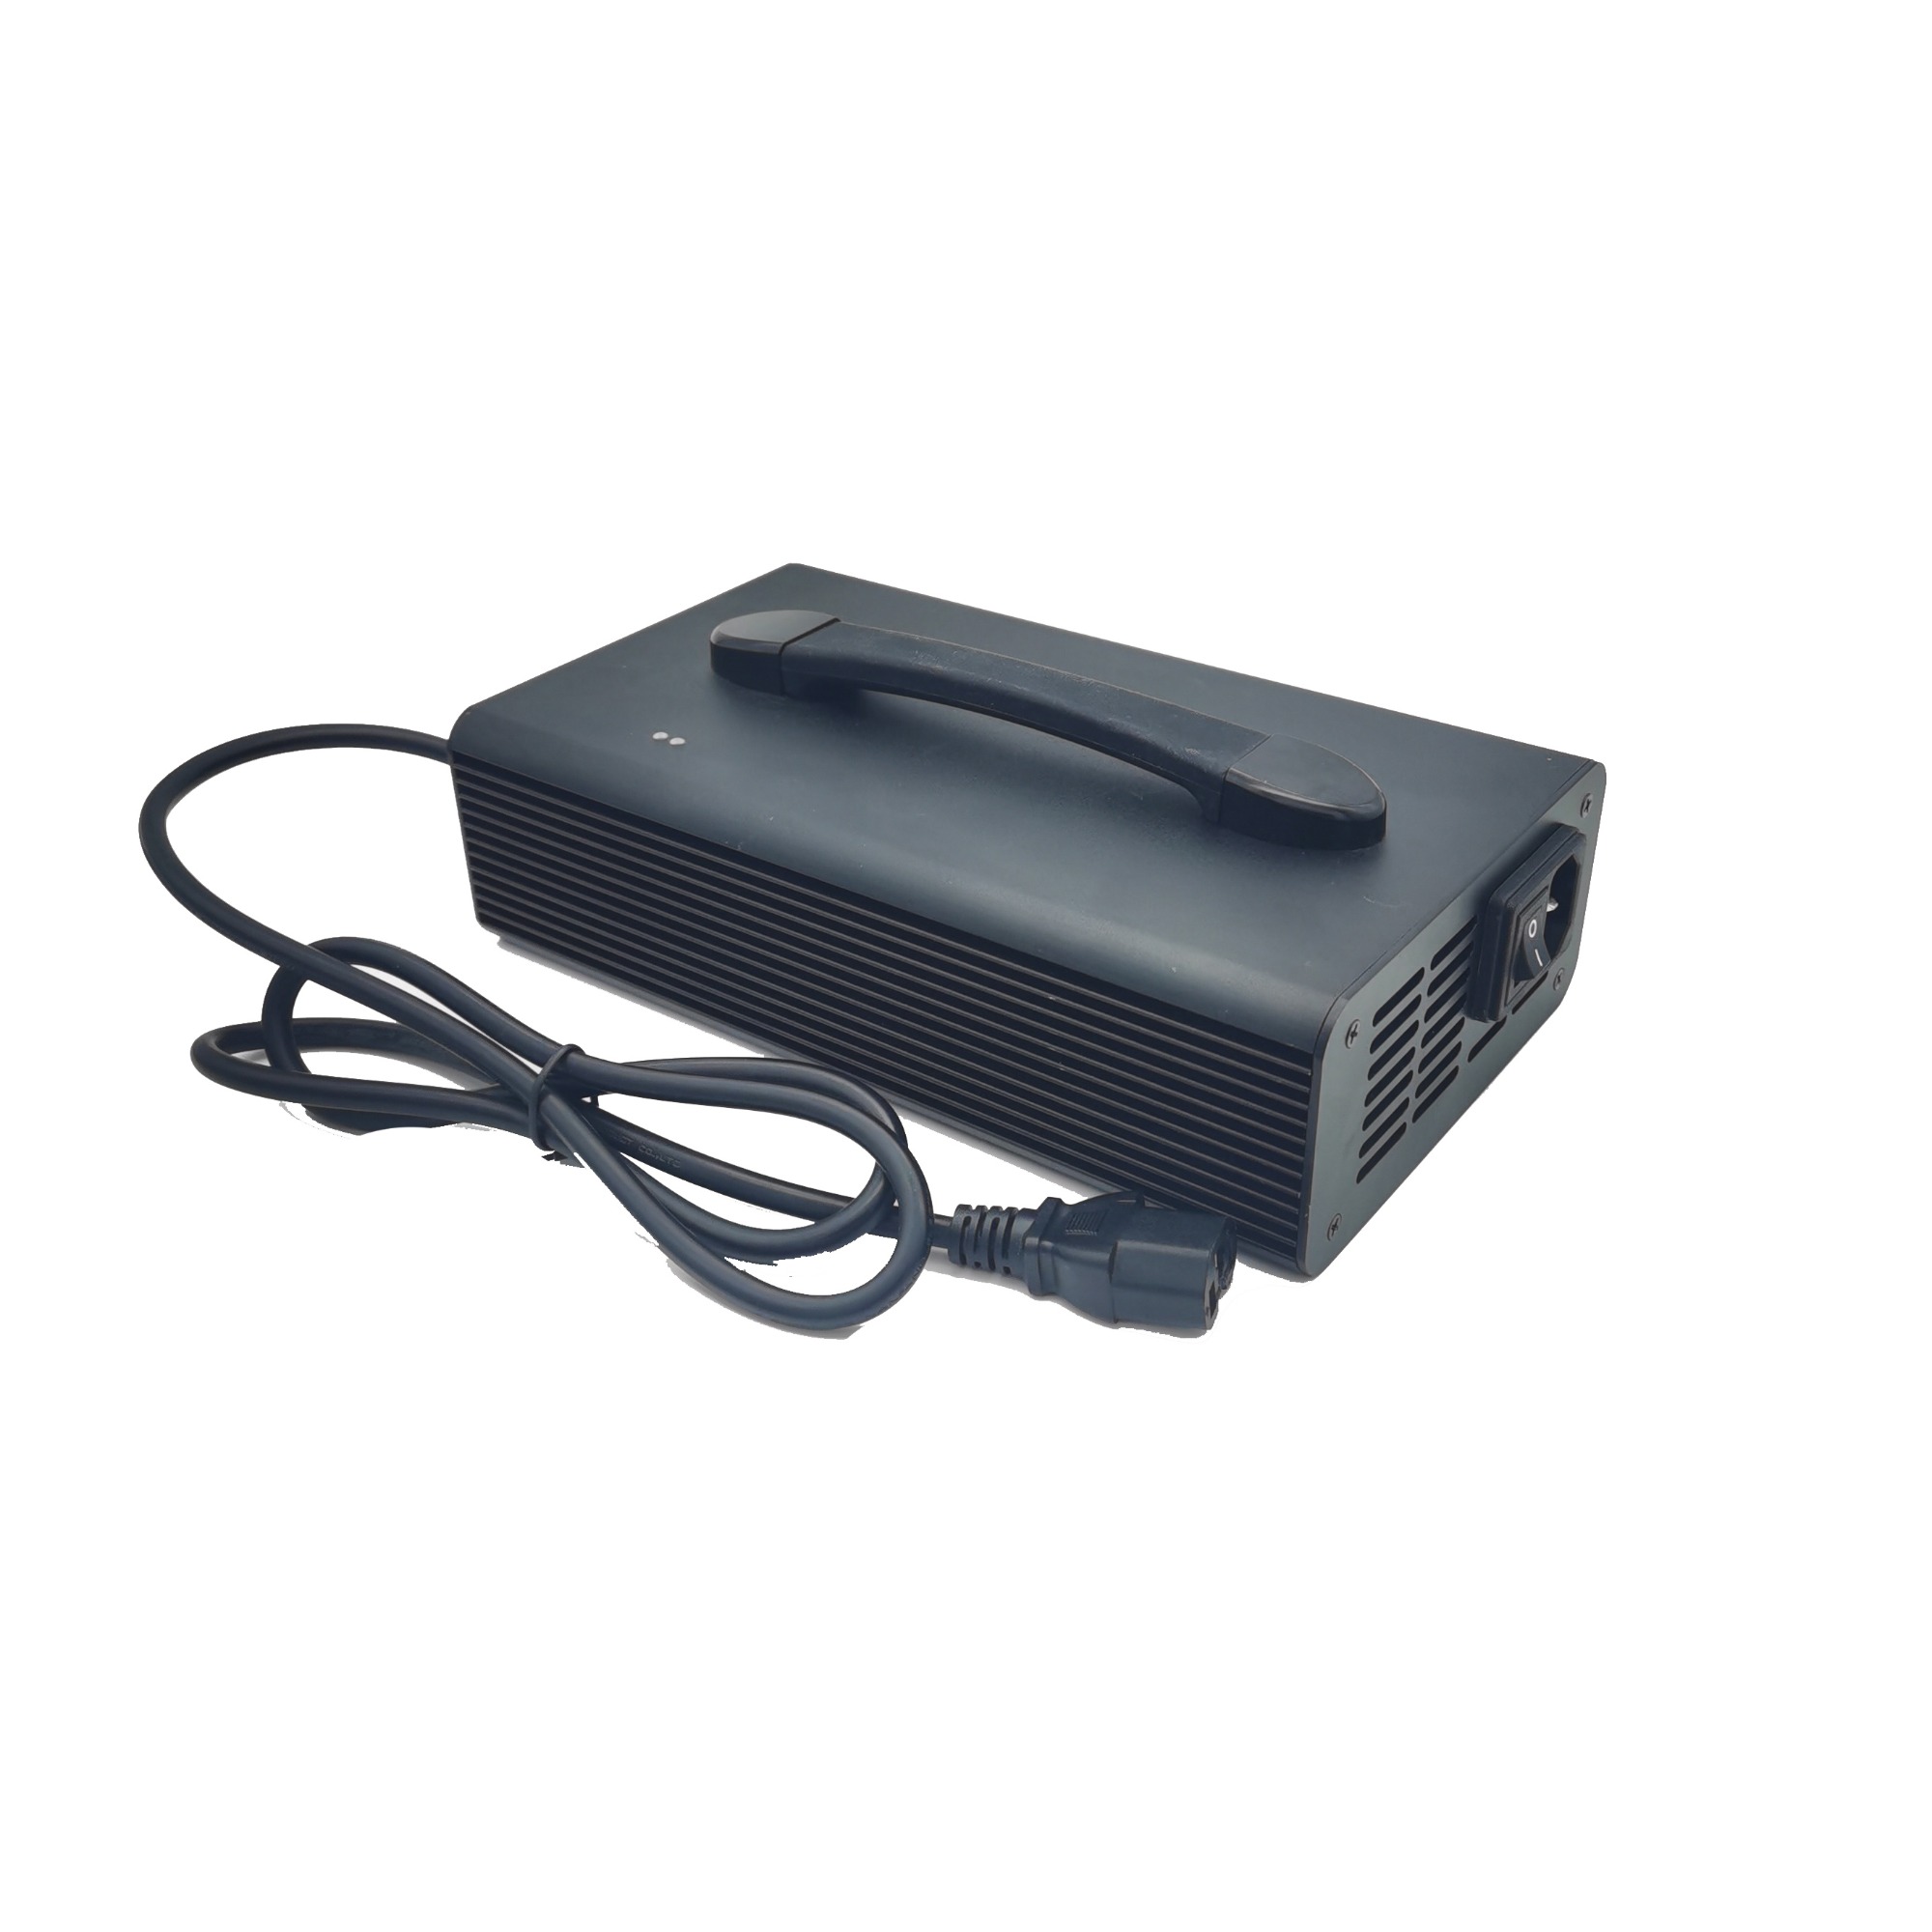 Smart design 87.6V 7A LiFePO4 battery charger For 24S LiFePO4 Battery charging